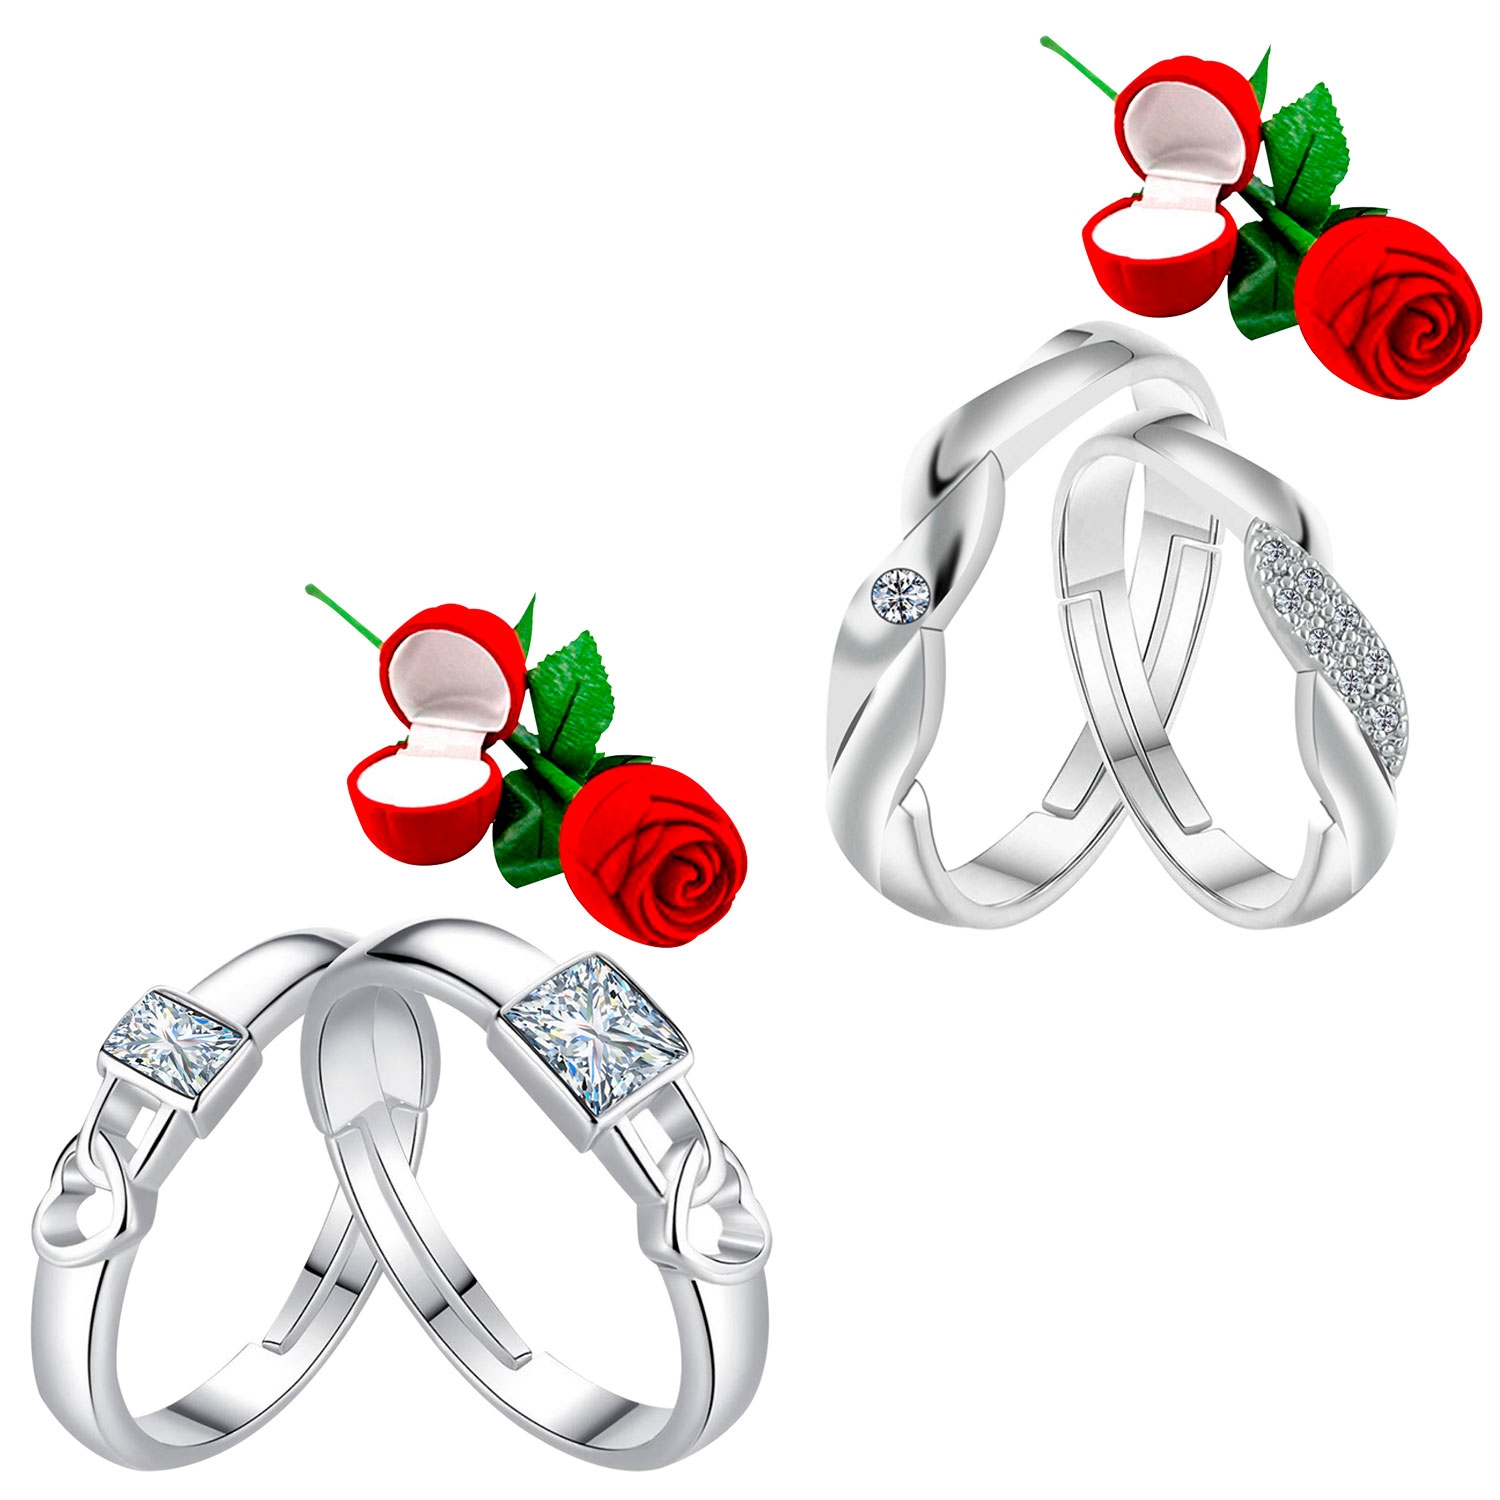 SILVER SHINE |  Adjustable Stylish Couple Rings Set for lovers with 2 Piece Red Rose Gift Box Silver Plated Stylish Ring for Men and Women 